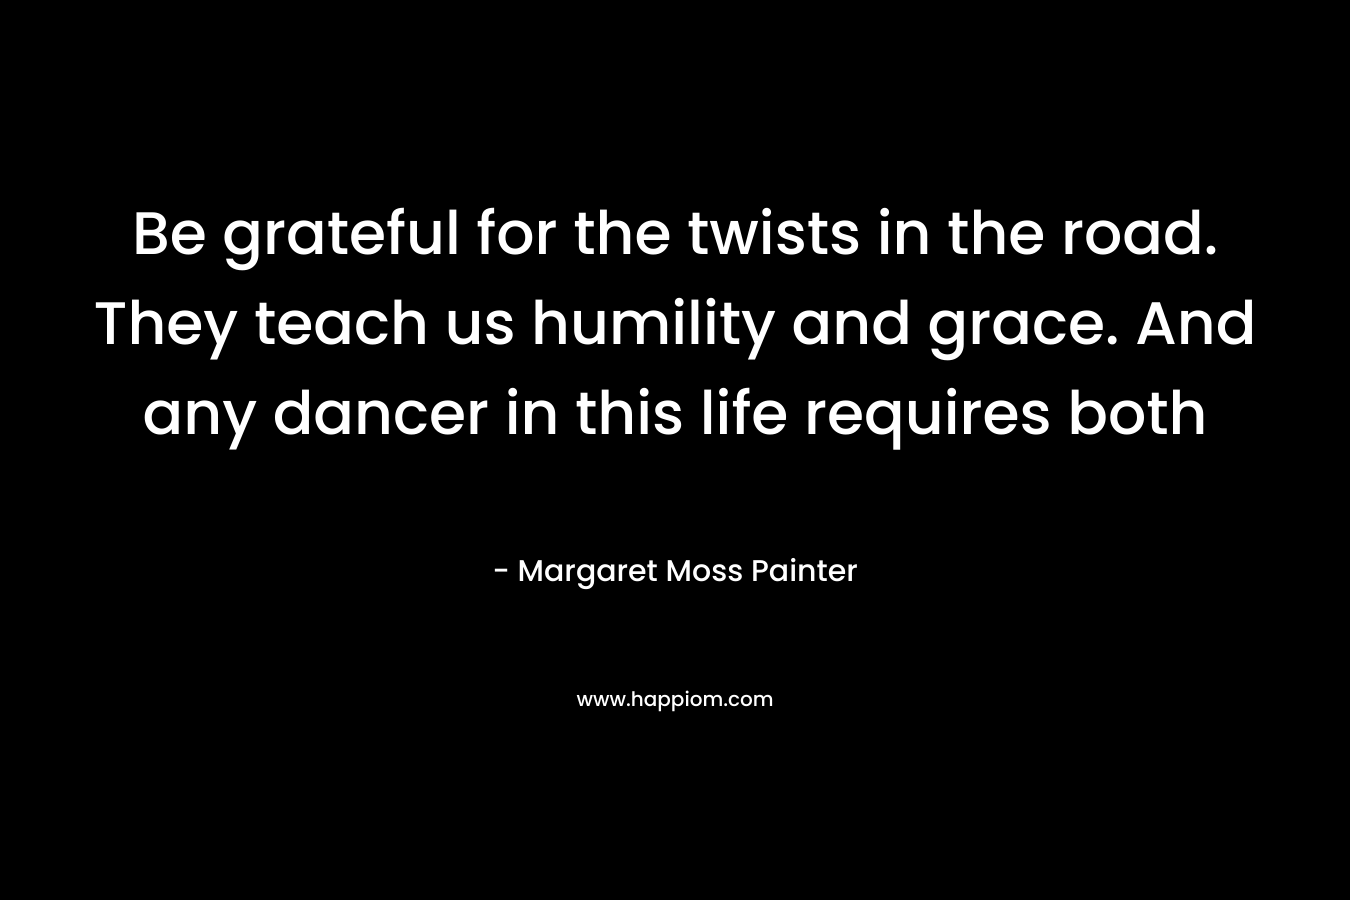 Be grateful for the twists in the road. They teach us humility and grace. And any dancer in this life requires both